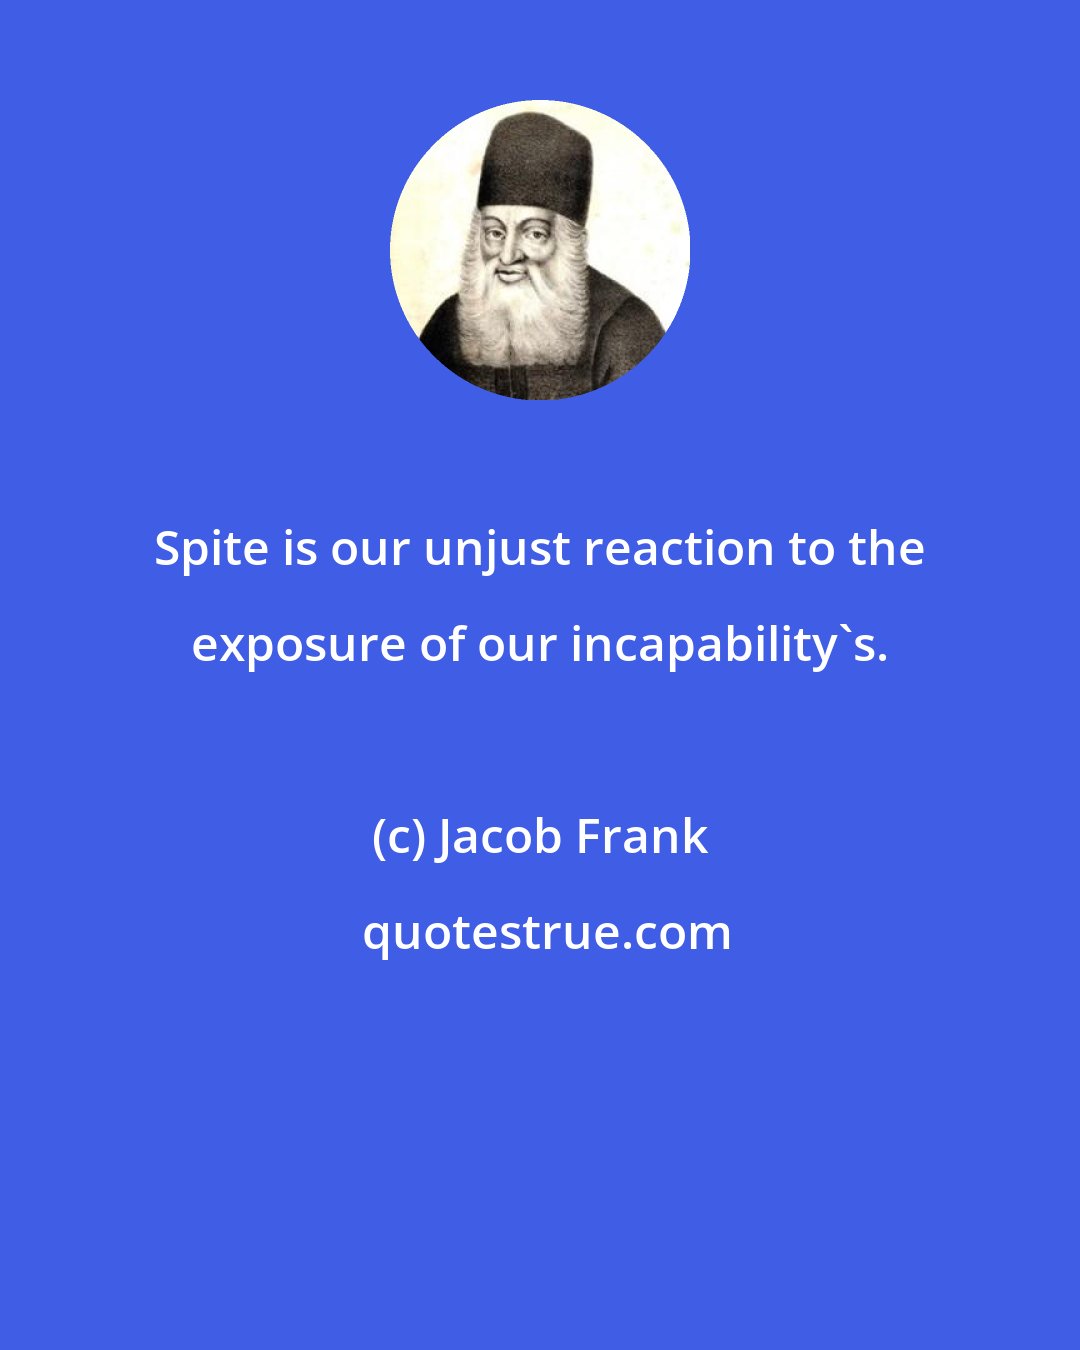 Jacob Frank: Spite is our unjust reaction to the exposure of our incapability's.